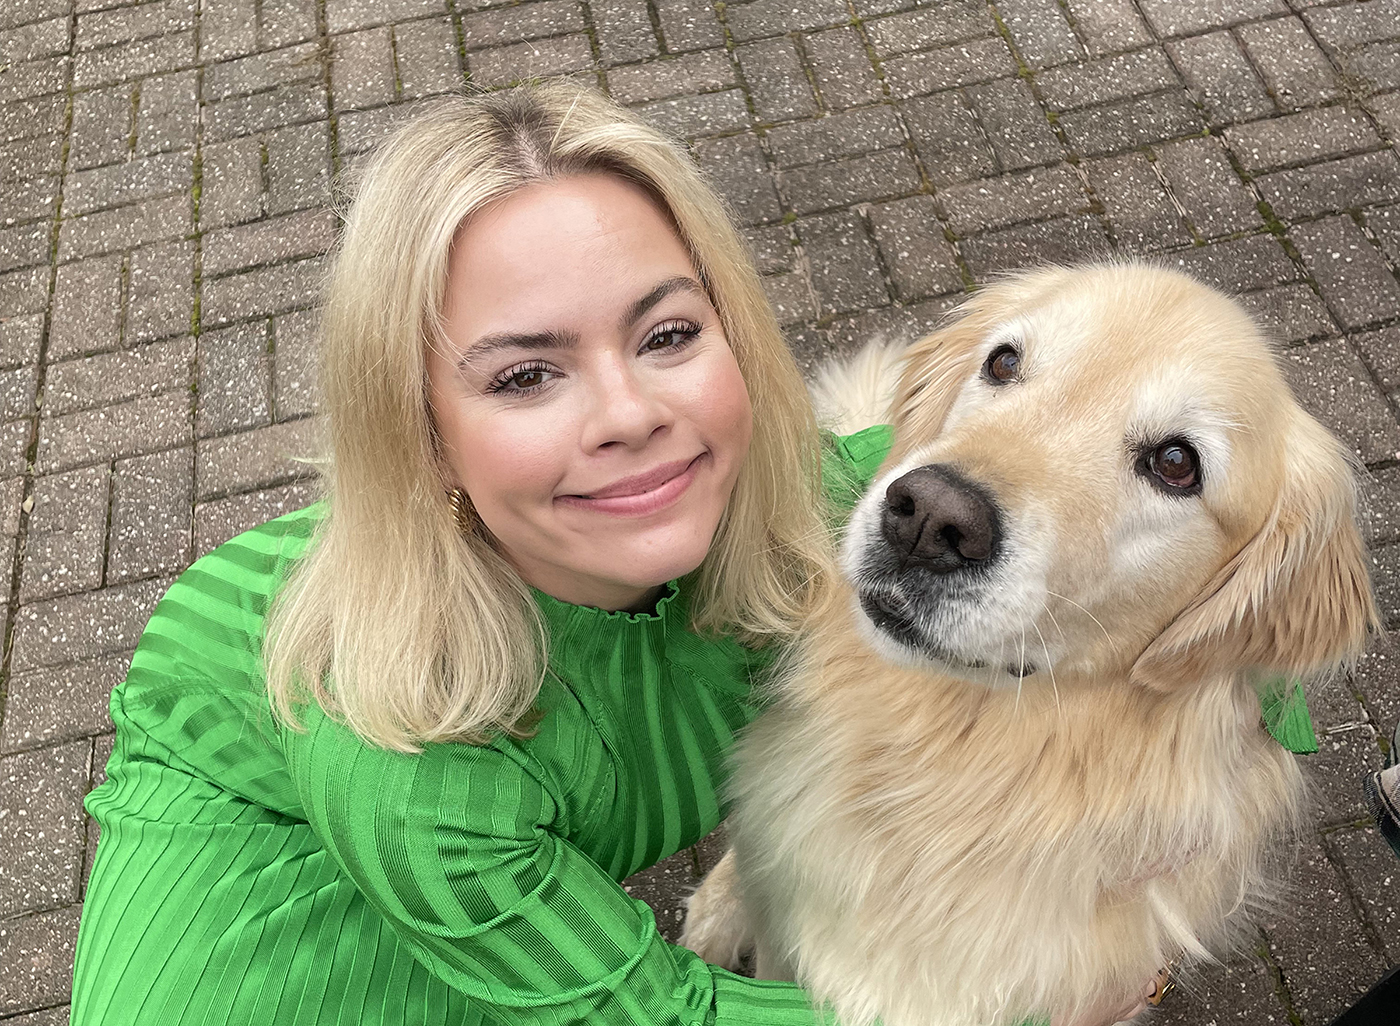 Amy Evans poses with her golden retriever, Teddy.